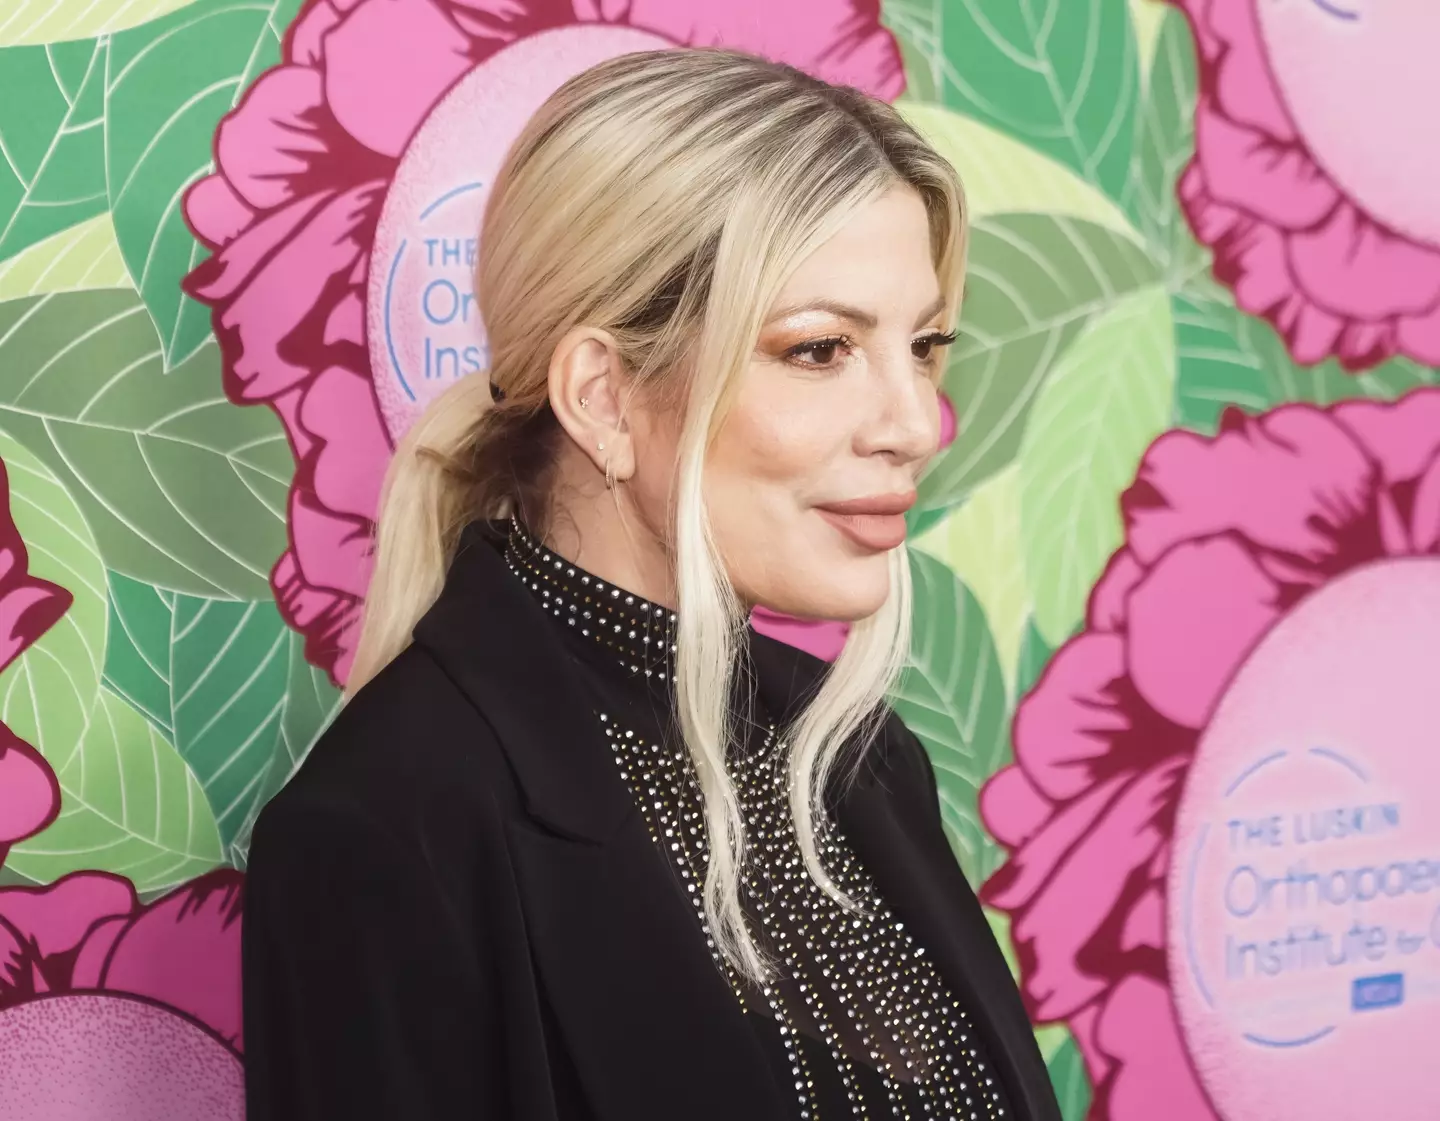 Tori Spelling had reportedly been experiencing financial hardship.